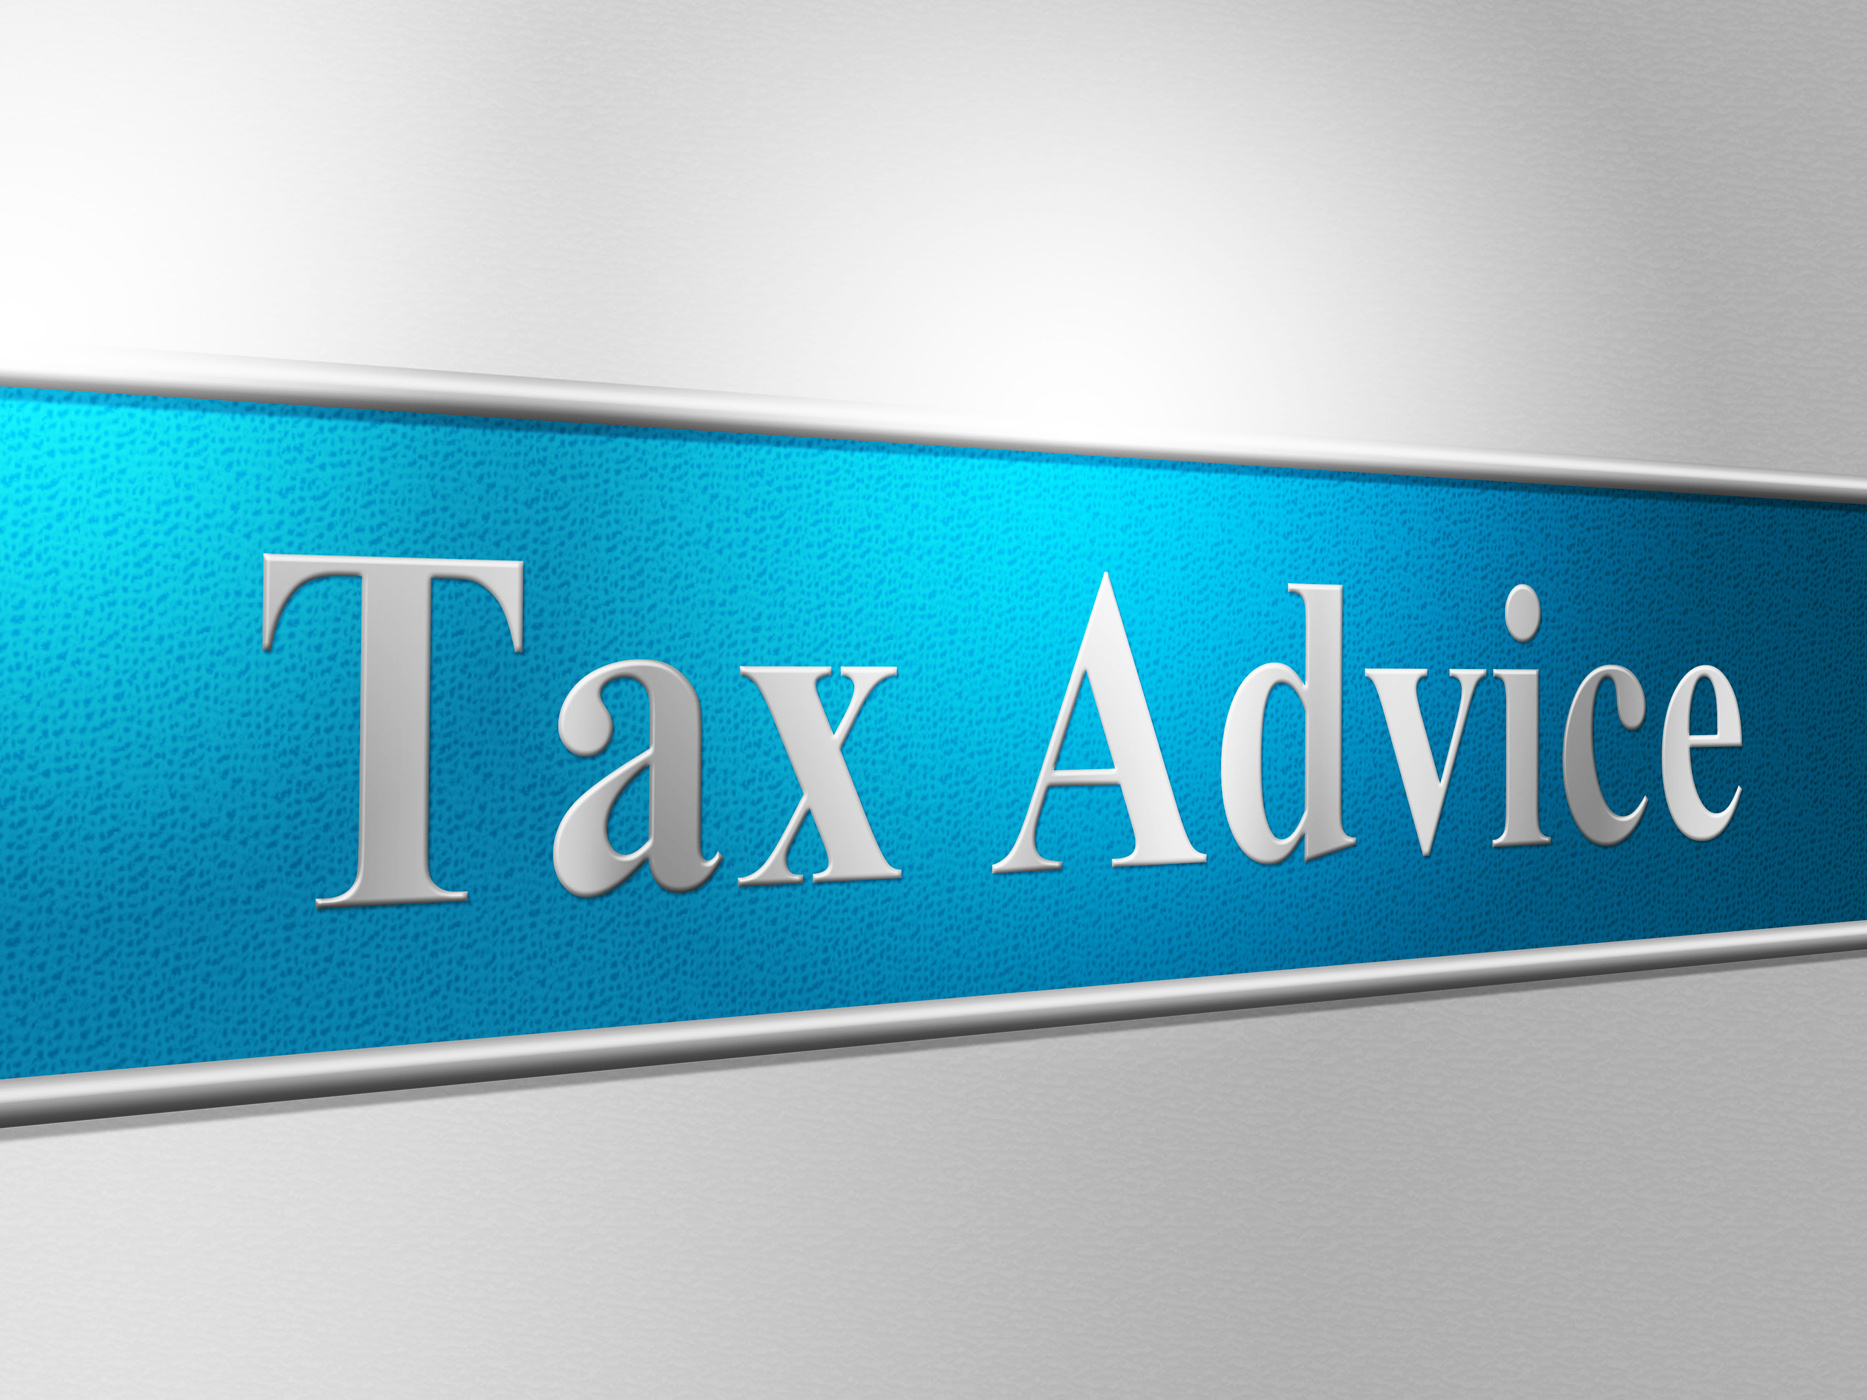 Tax advice means excise helps and faq photo